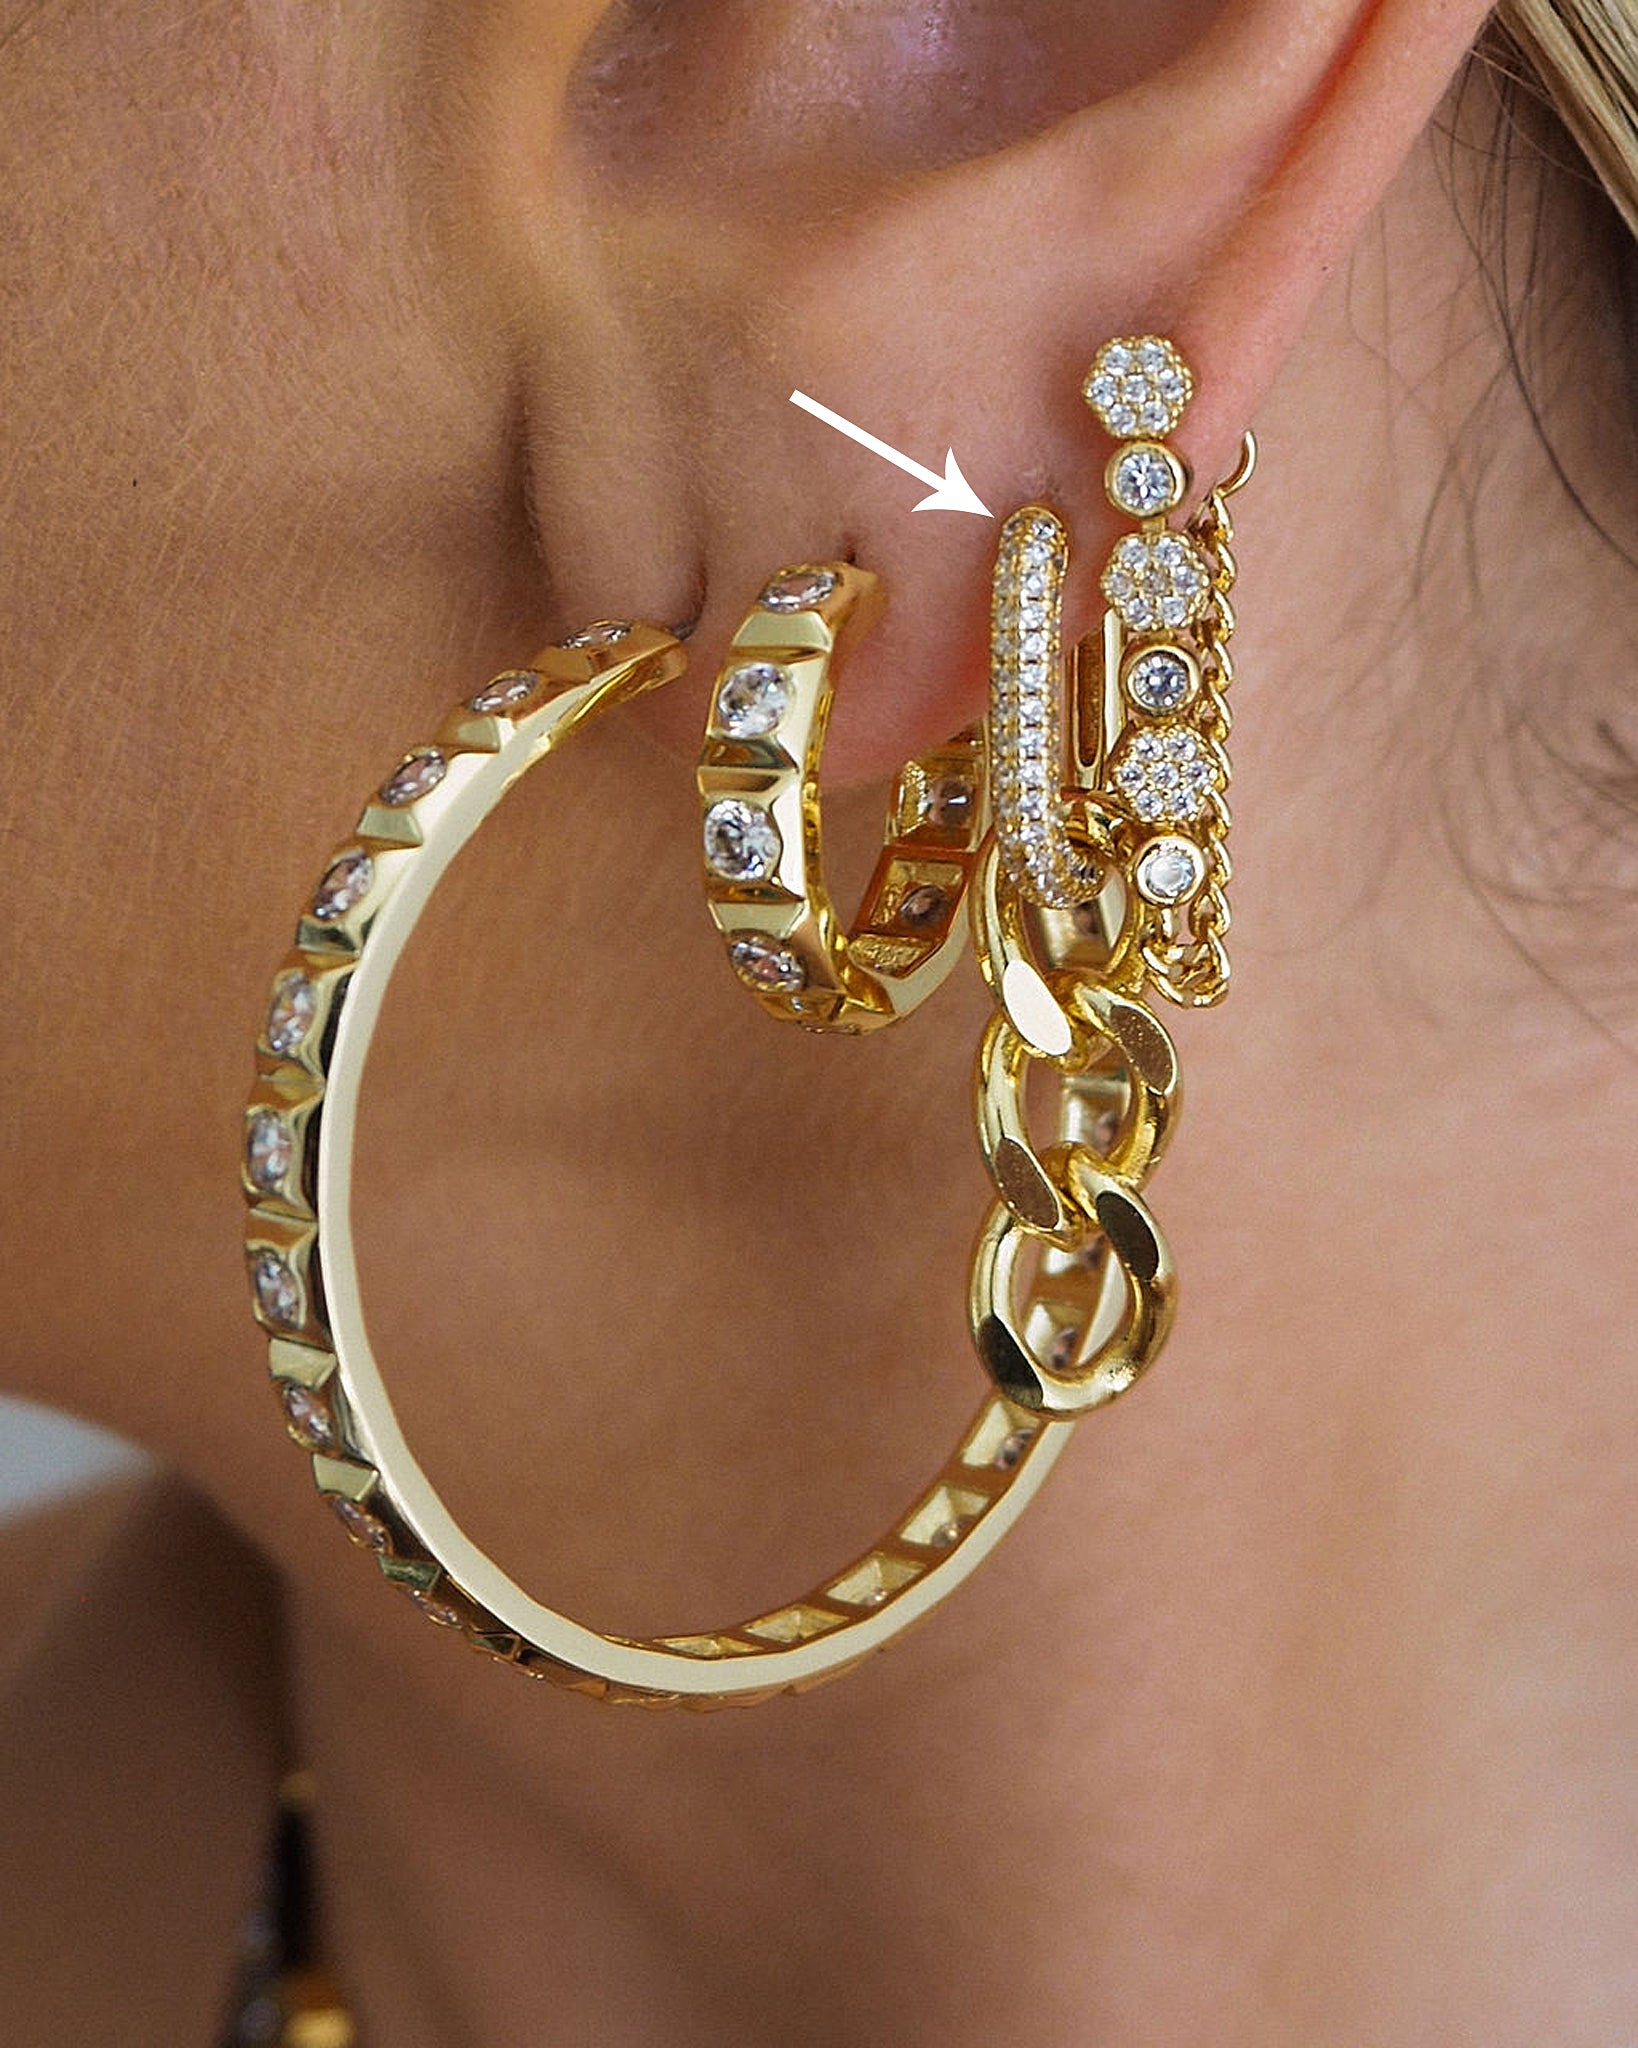 Luv Aj Hanging Pave Chain Link Huggie Hoop Earrings in CZ and Polished Gold